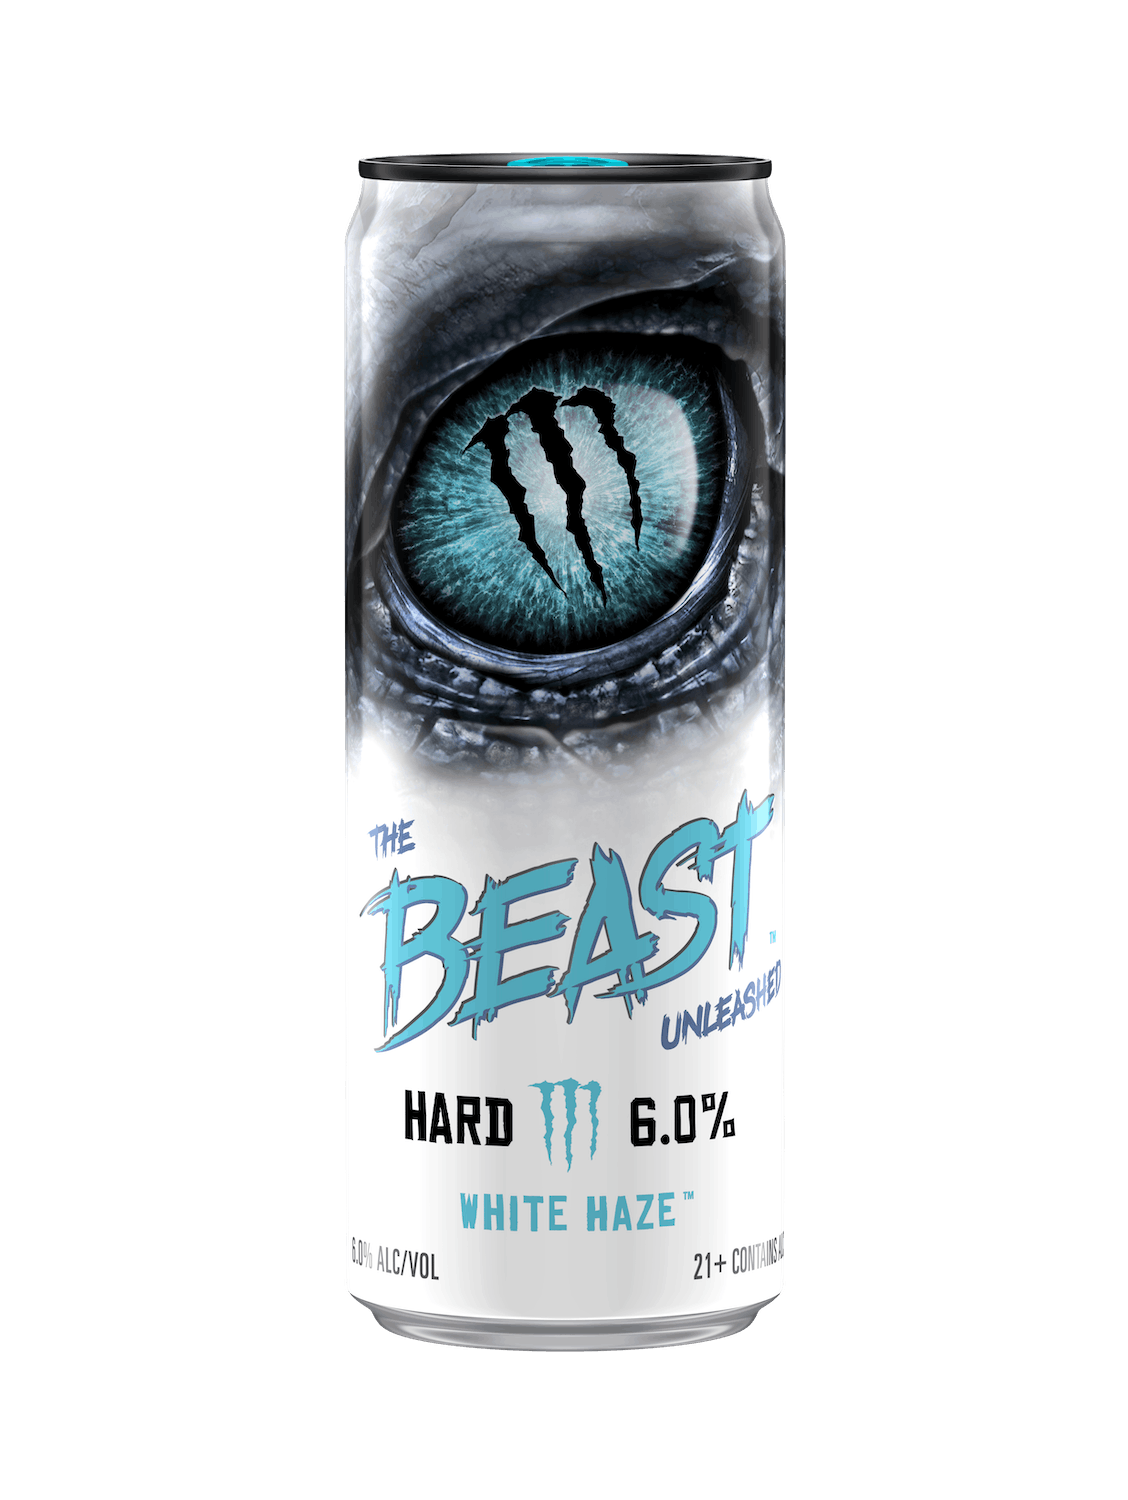 The Beast Unleashed by Monster. White Haze